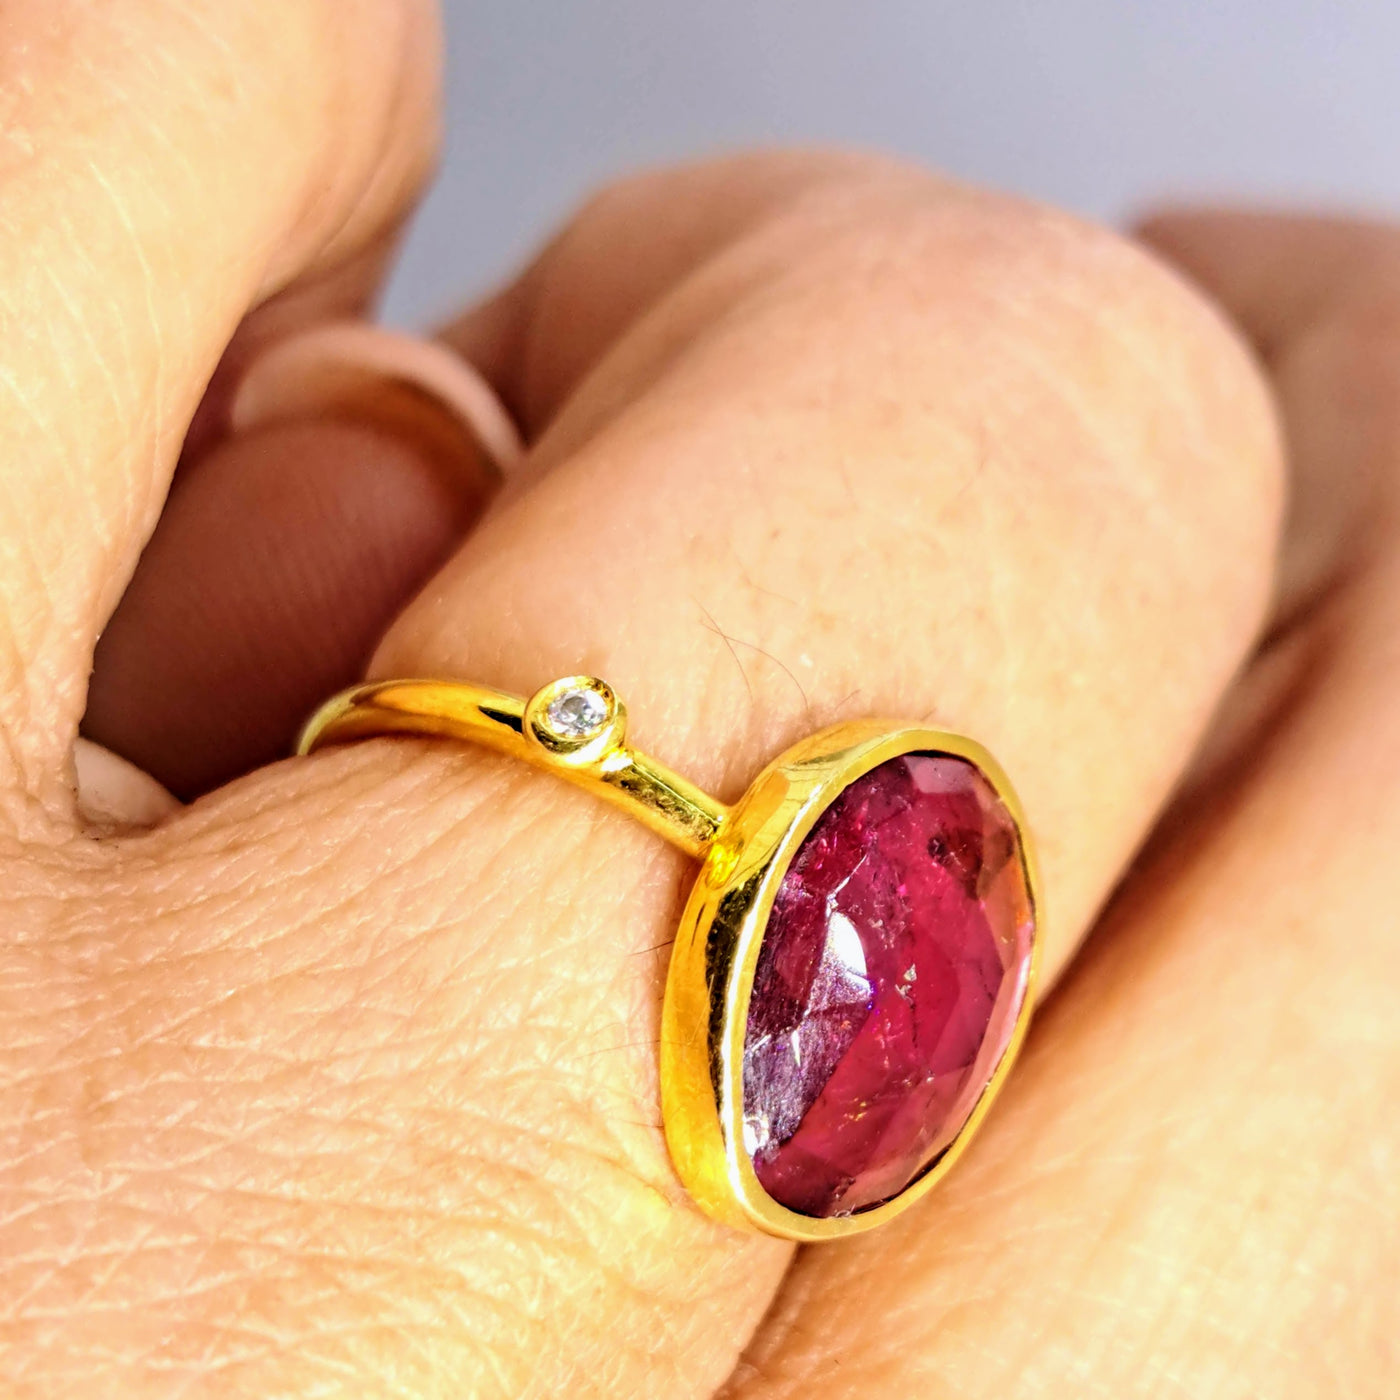 "Paint This Mother PINK!" Sz 7 Ring - Tourmaline, Diamond, 18K Gold Sterling